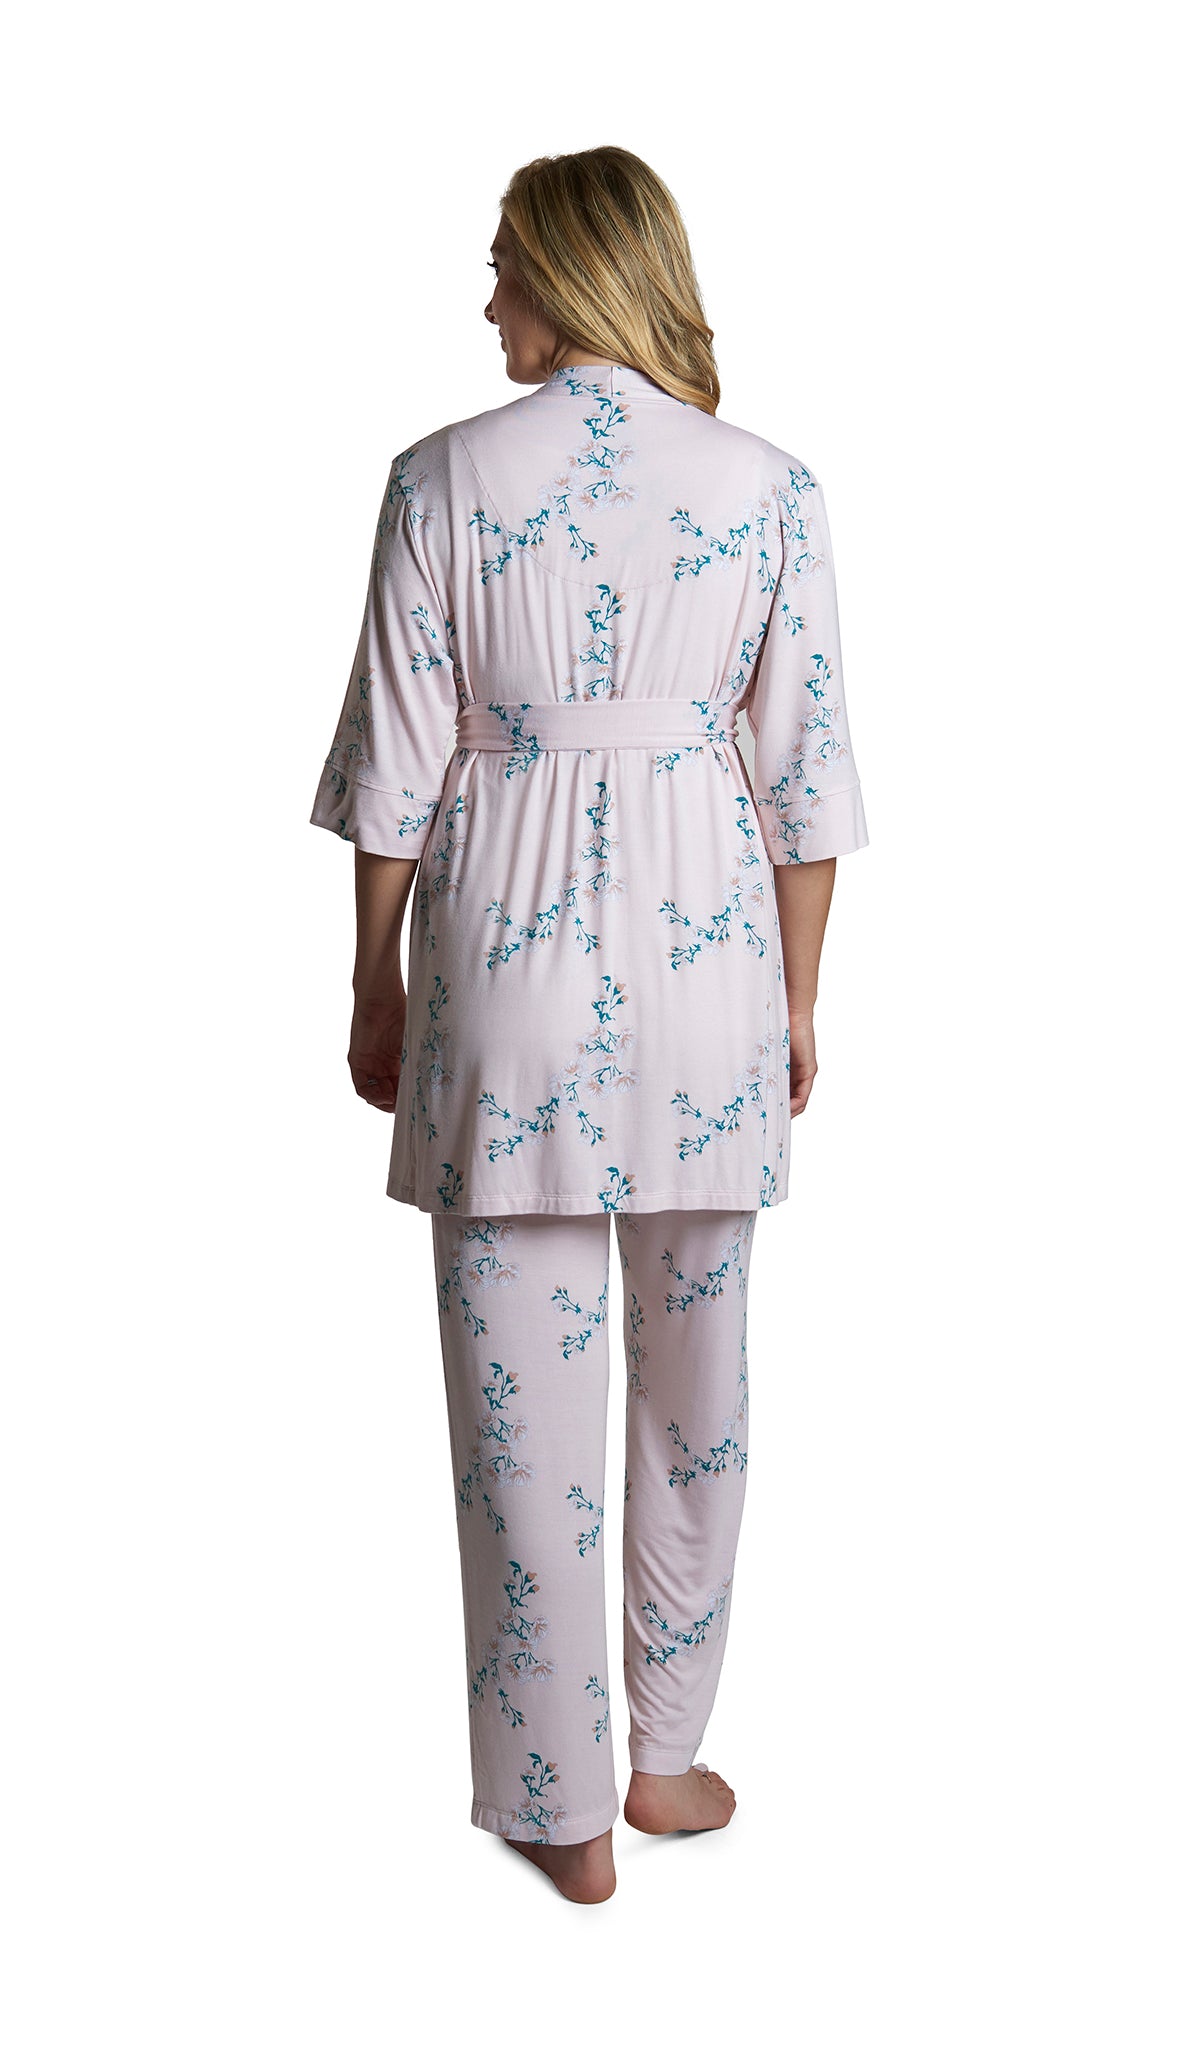 Lily Analise 3-Piece Set, back shot of woman wearing robe and pant.